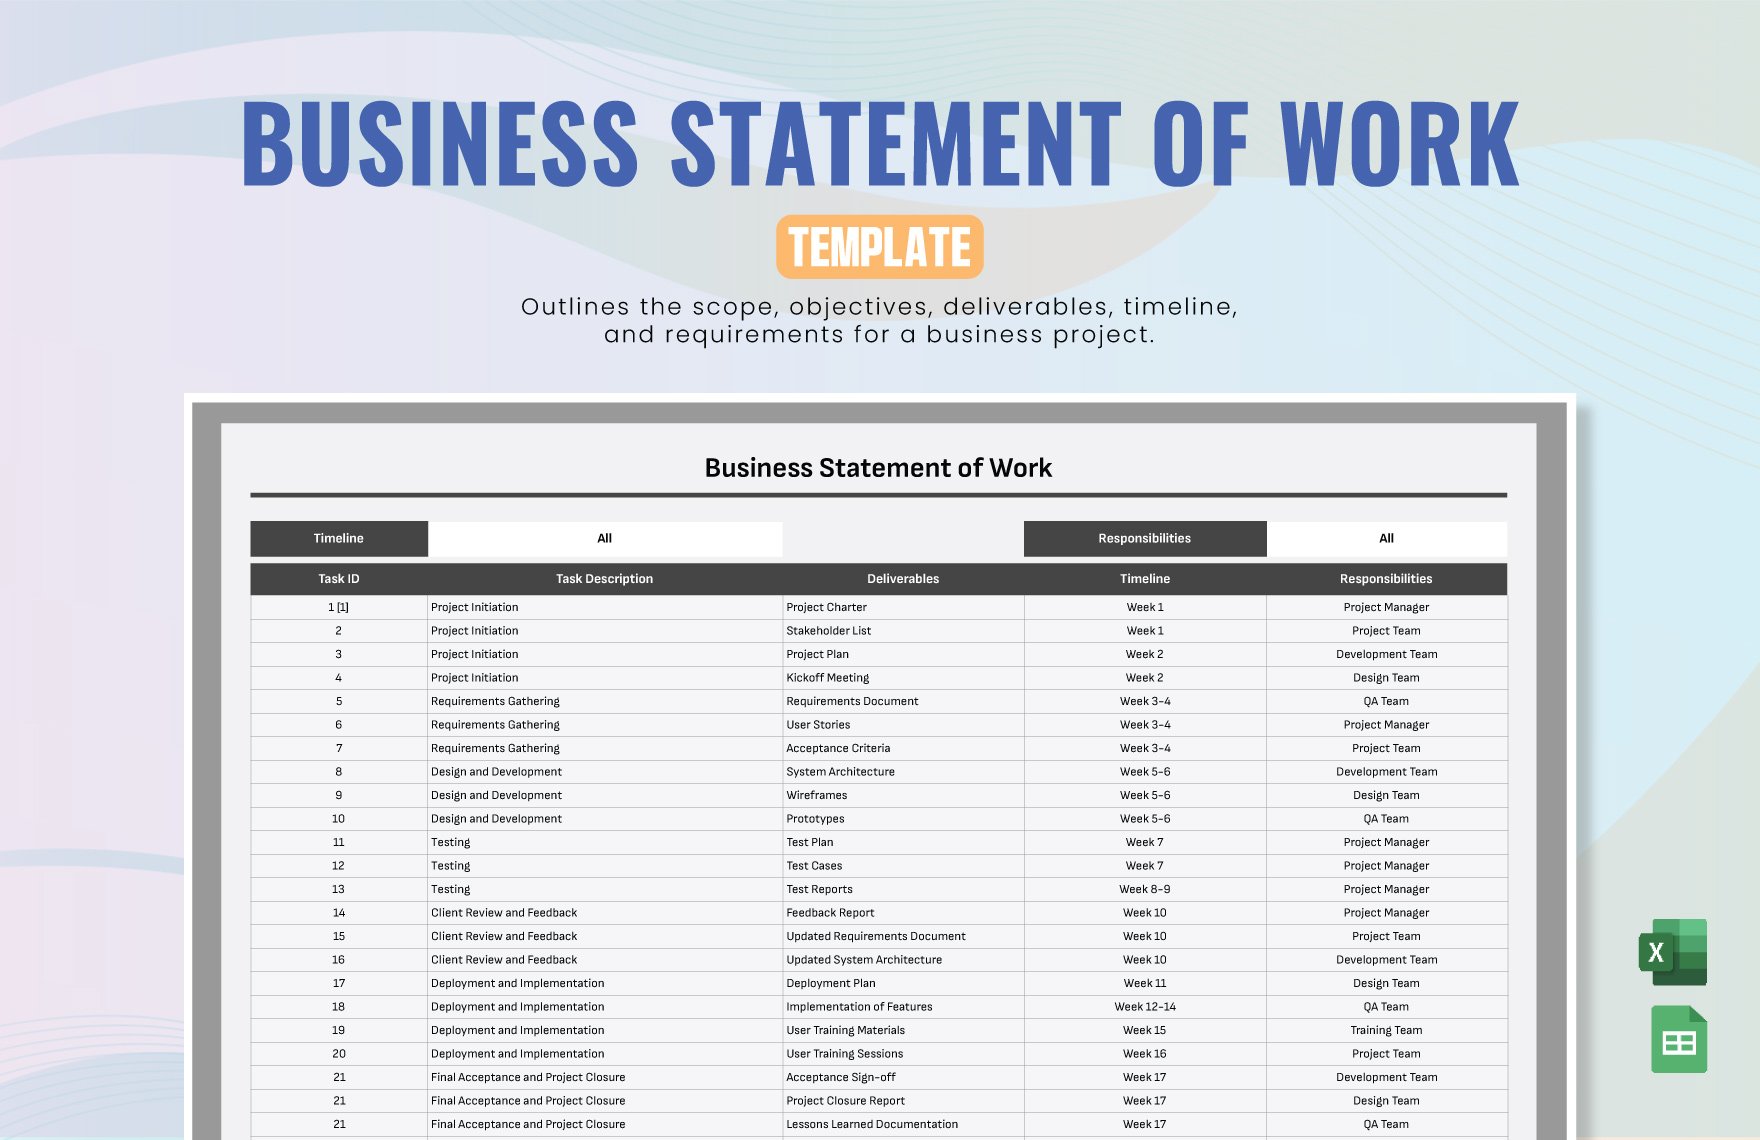 Business Statement of Work Template in Excel, Google Sheets